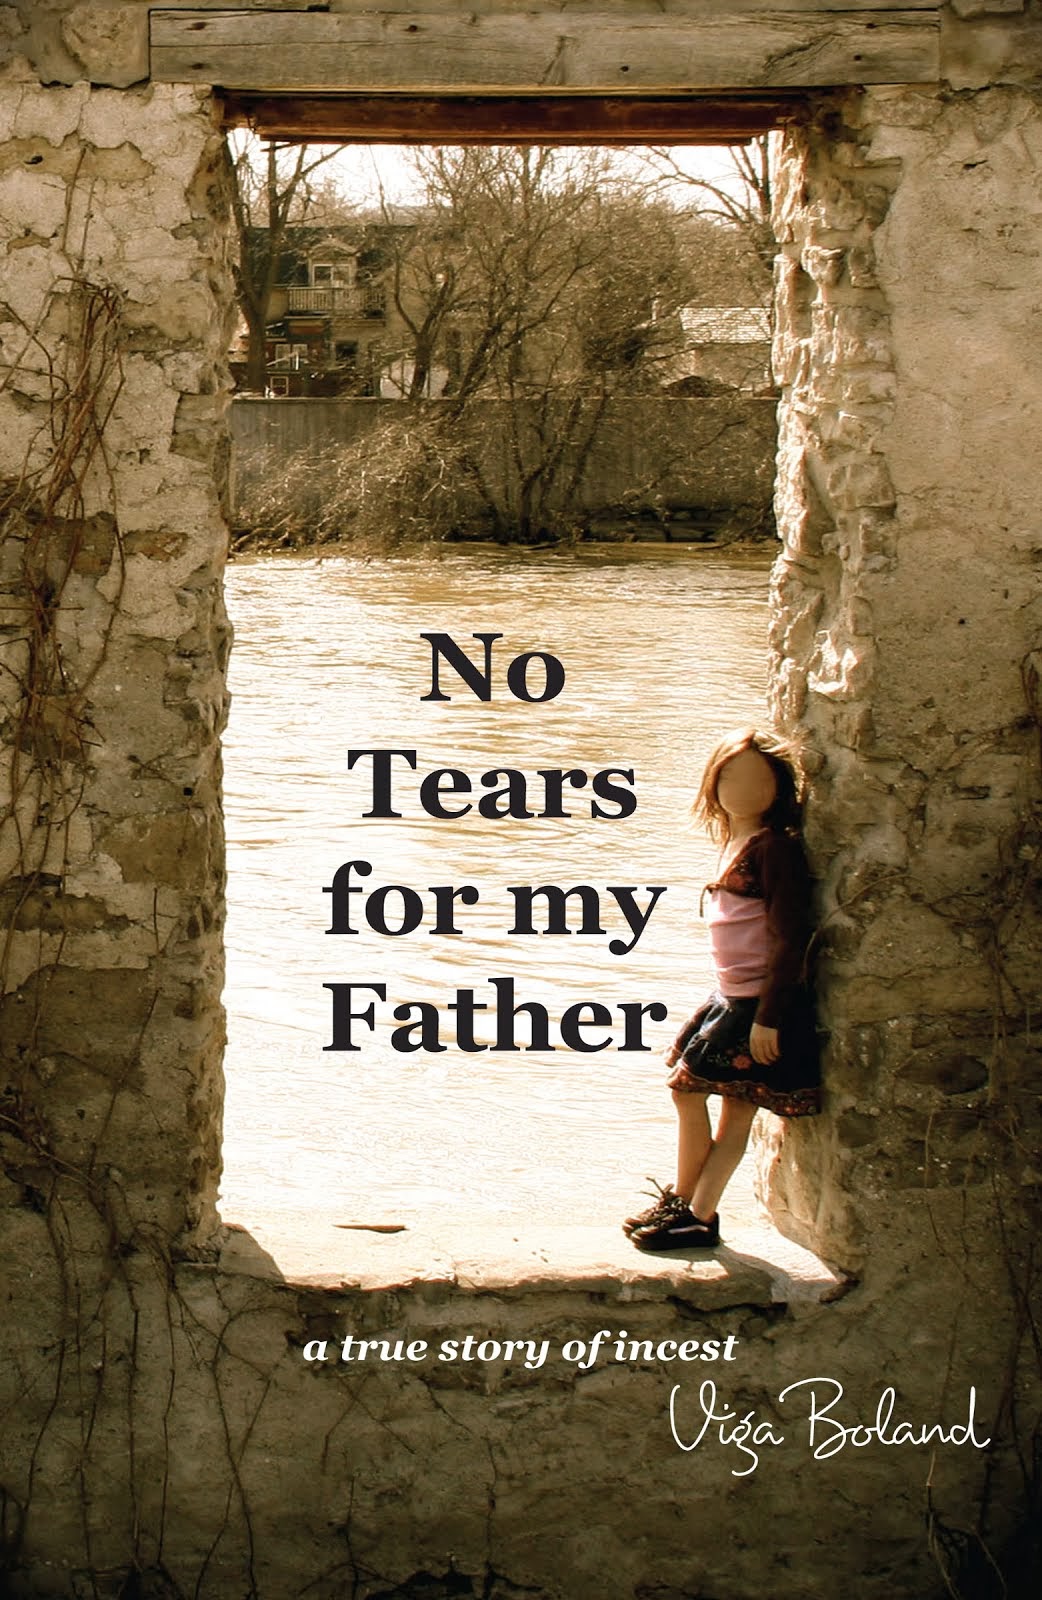 WHERE CAN I BUY "NO TEARS FOR MY FATHER"?